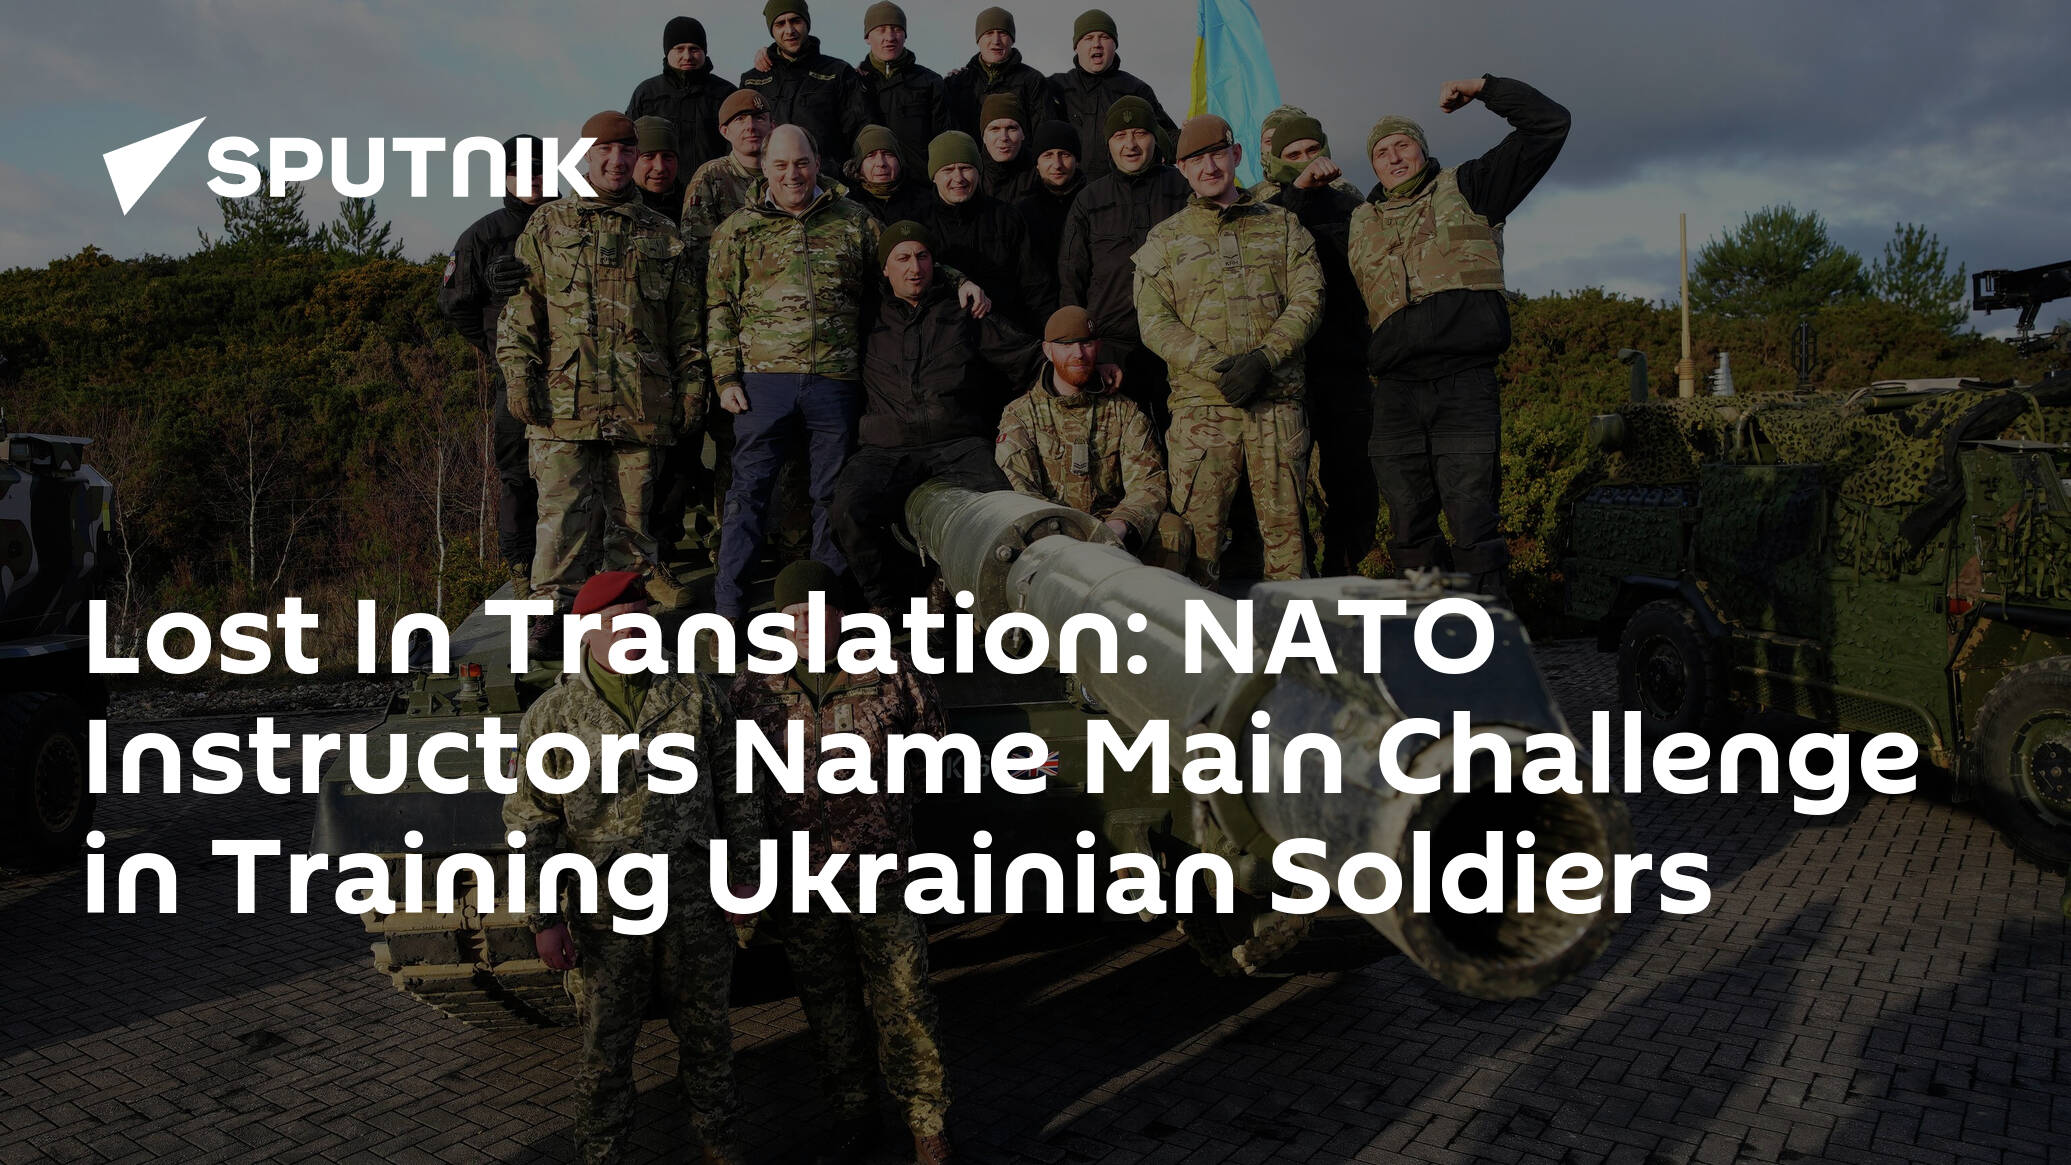 Lost In Translation: NATO Instructors Name Main Challenge in Training Ukrainian Soldiers